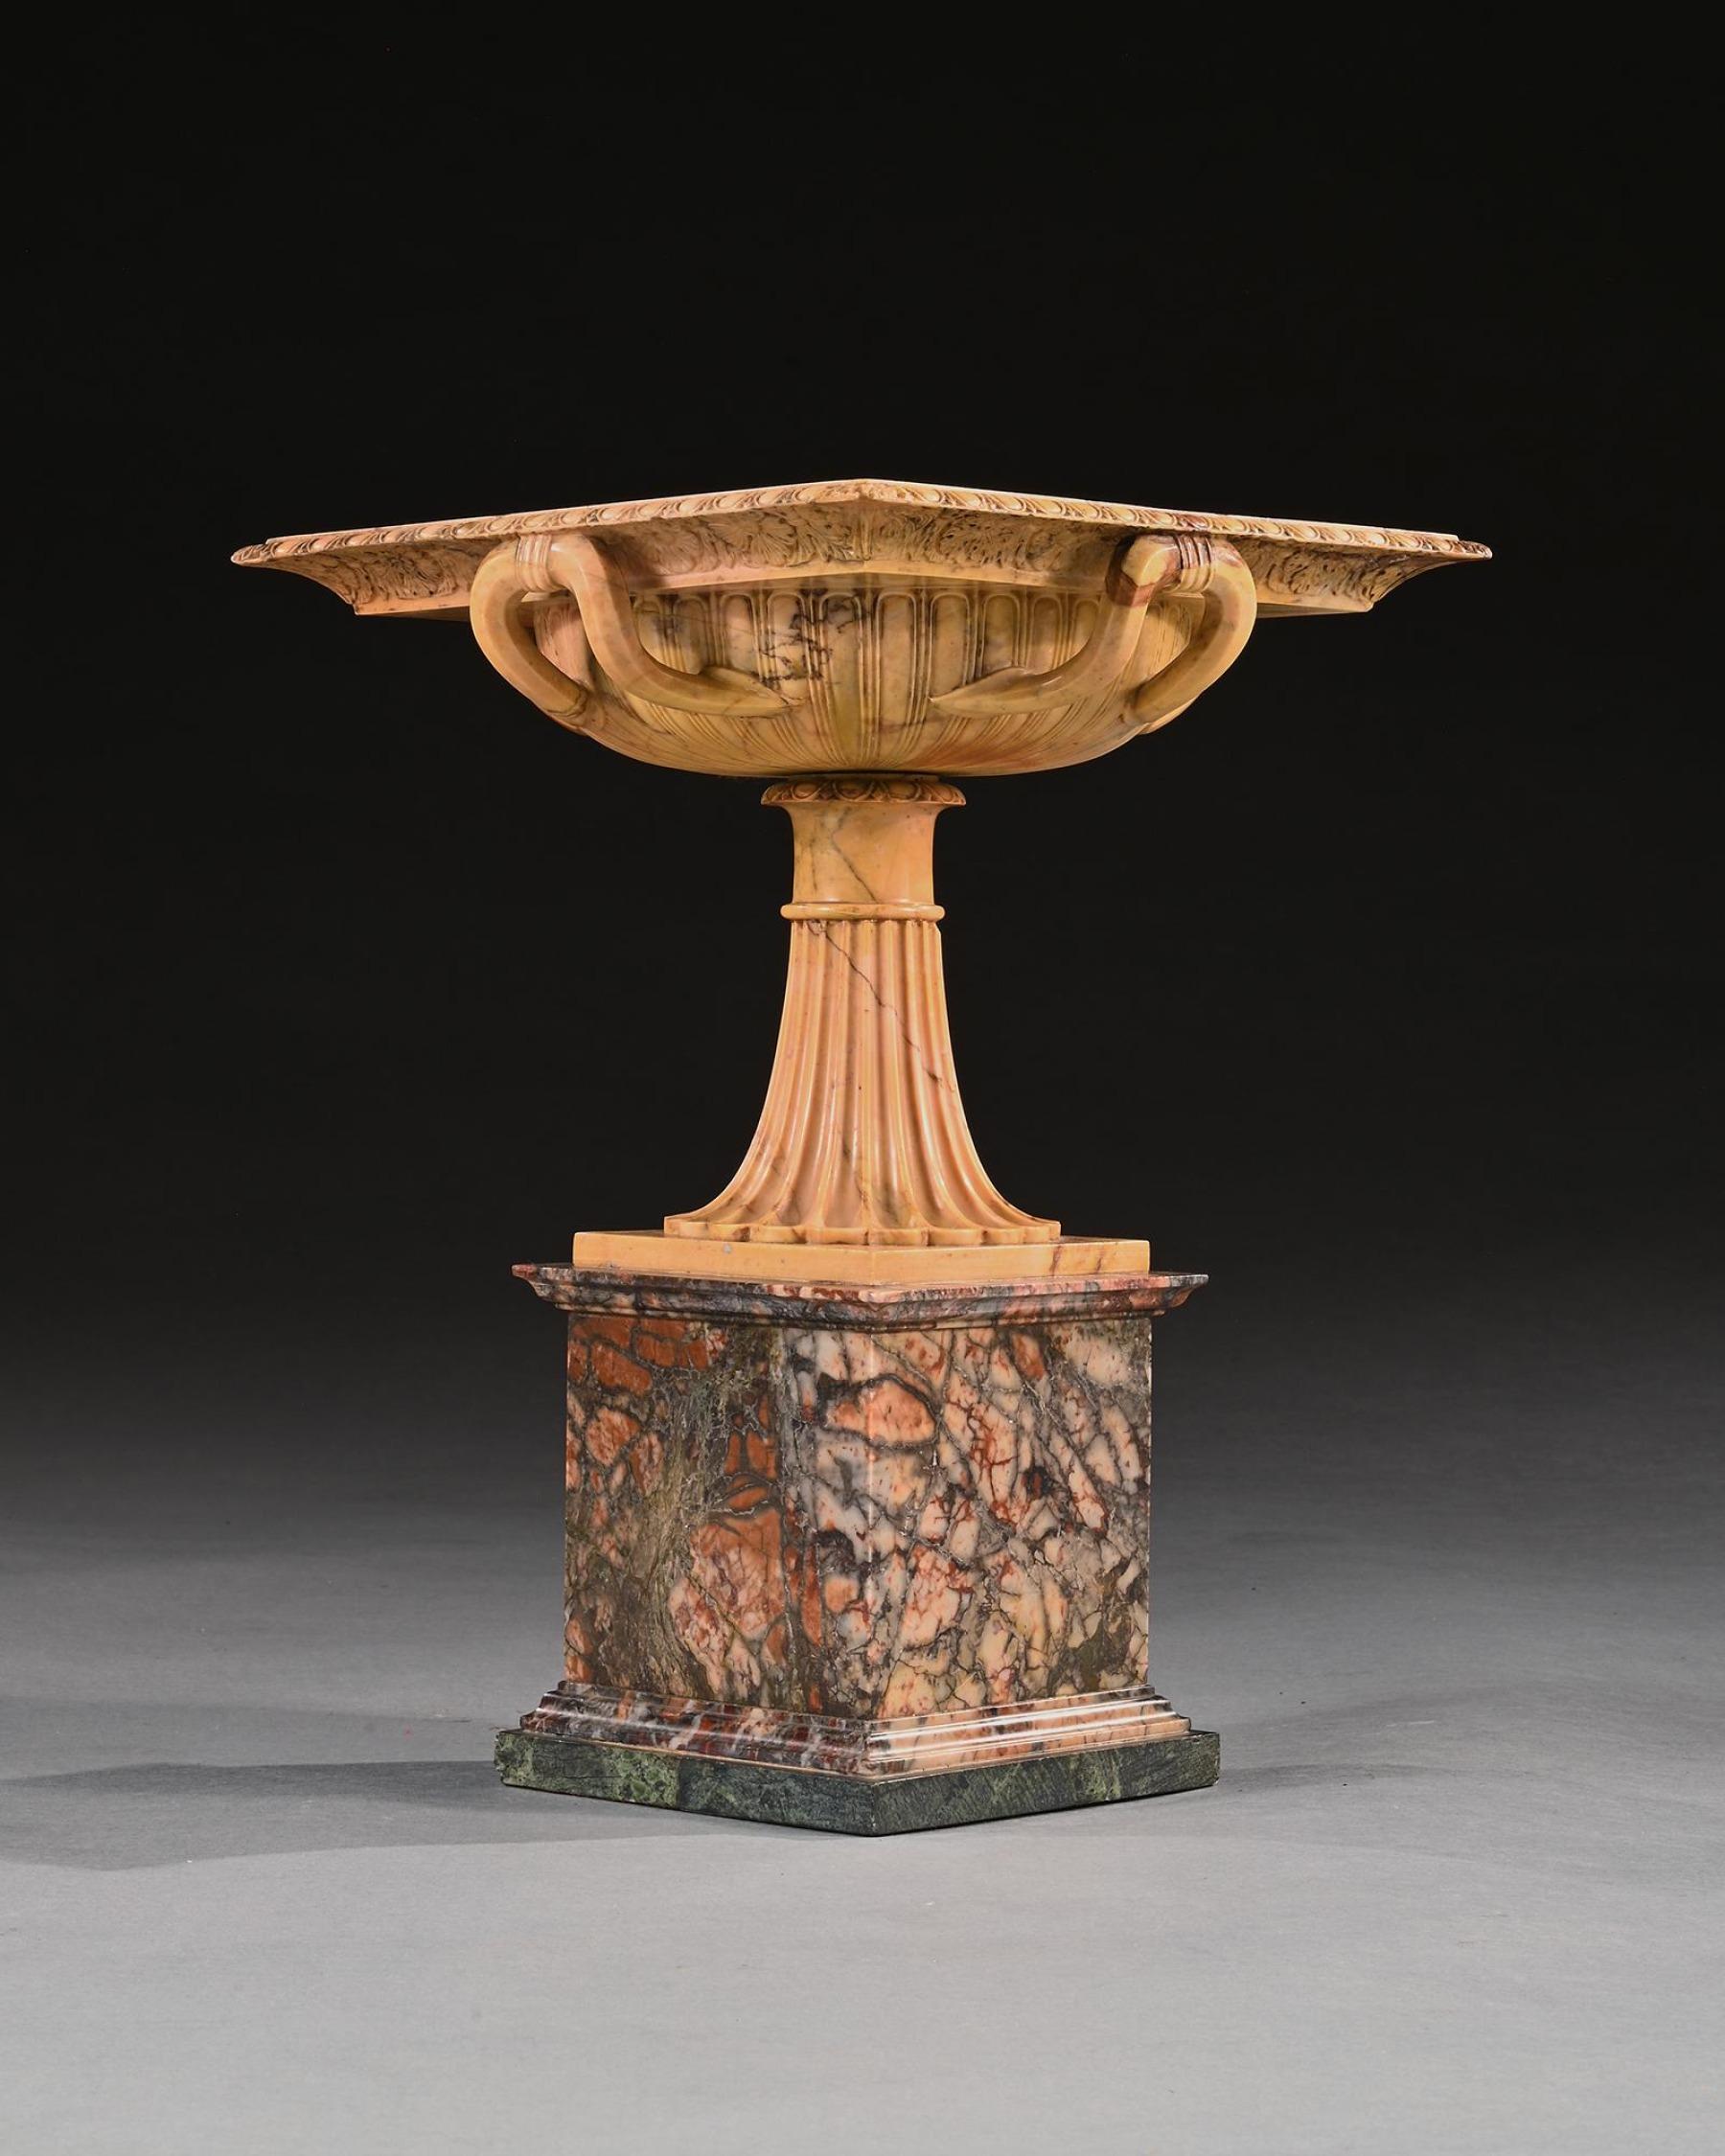 An Exquisite Giallo Antico Tazza of Unusual Square Section With Finely Carved Interior Attributed to Benedetto Boschetti 

Italy Circa1820-40

Provenance
The private collection of Will Fisher, antique dealer and connoisseur and the founder of Jamb